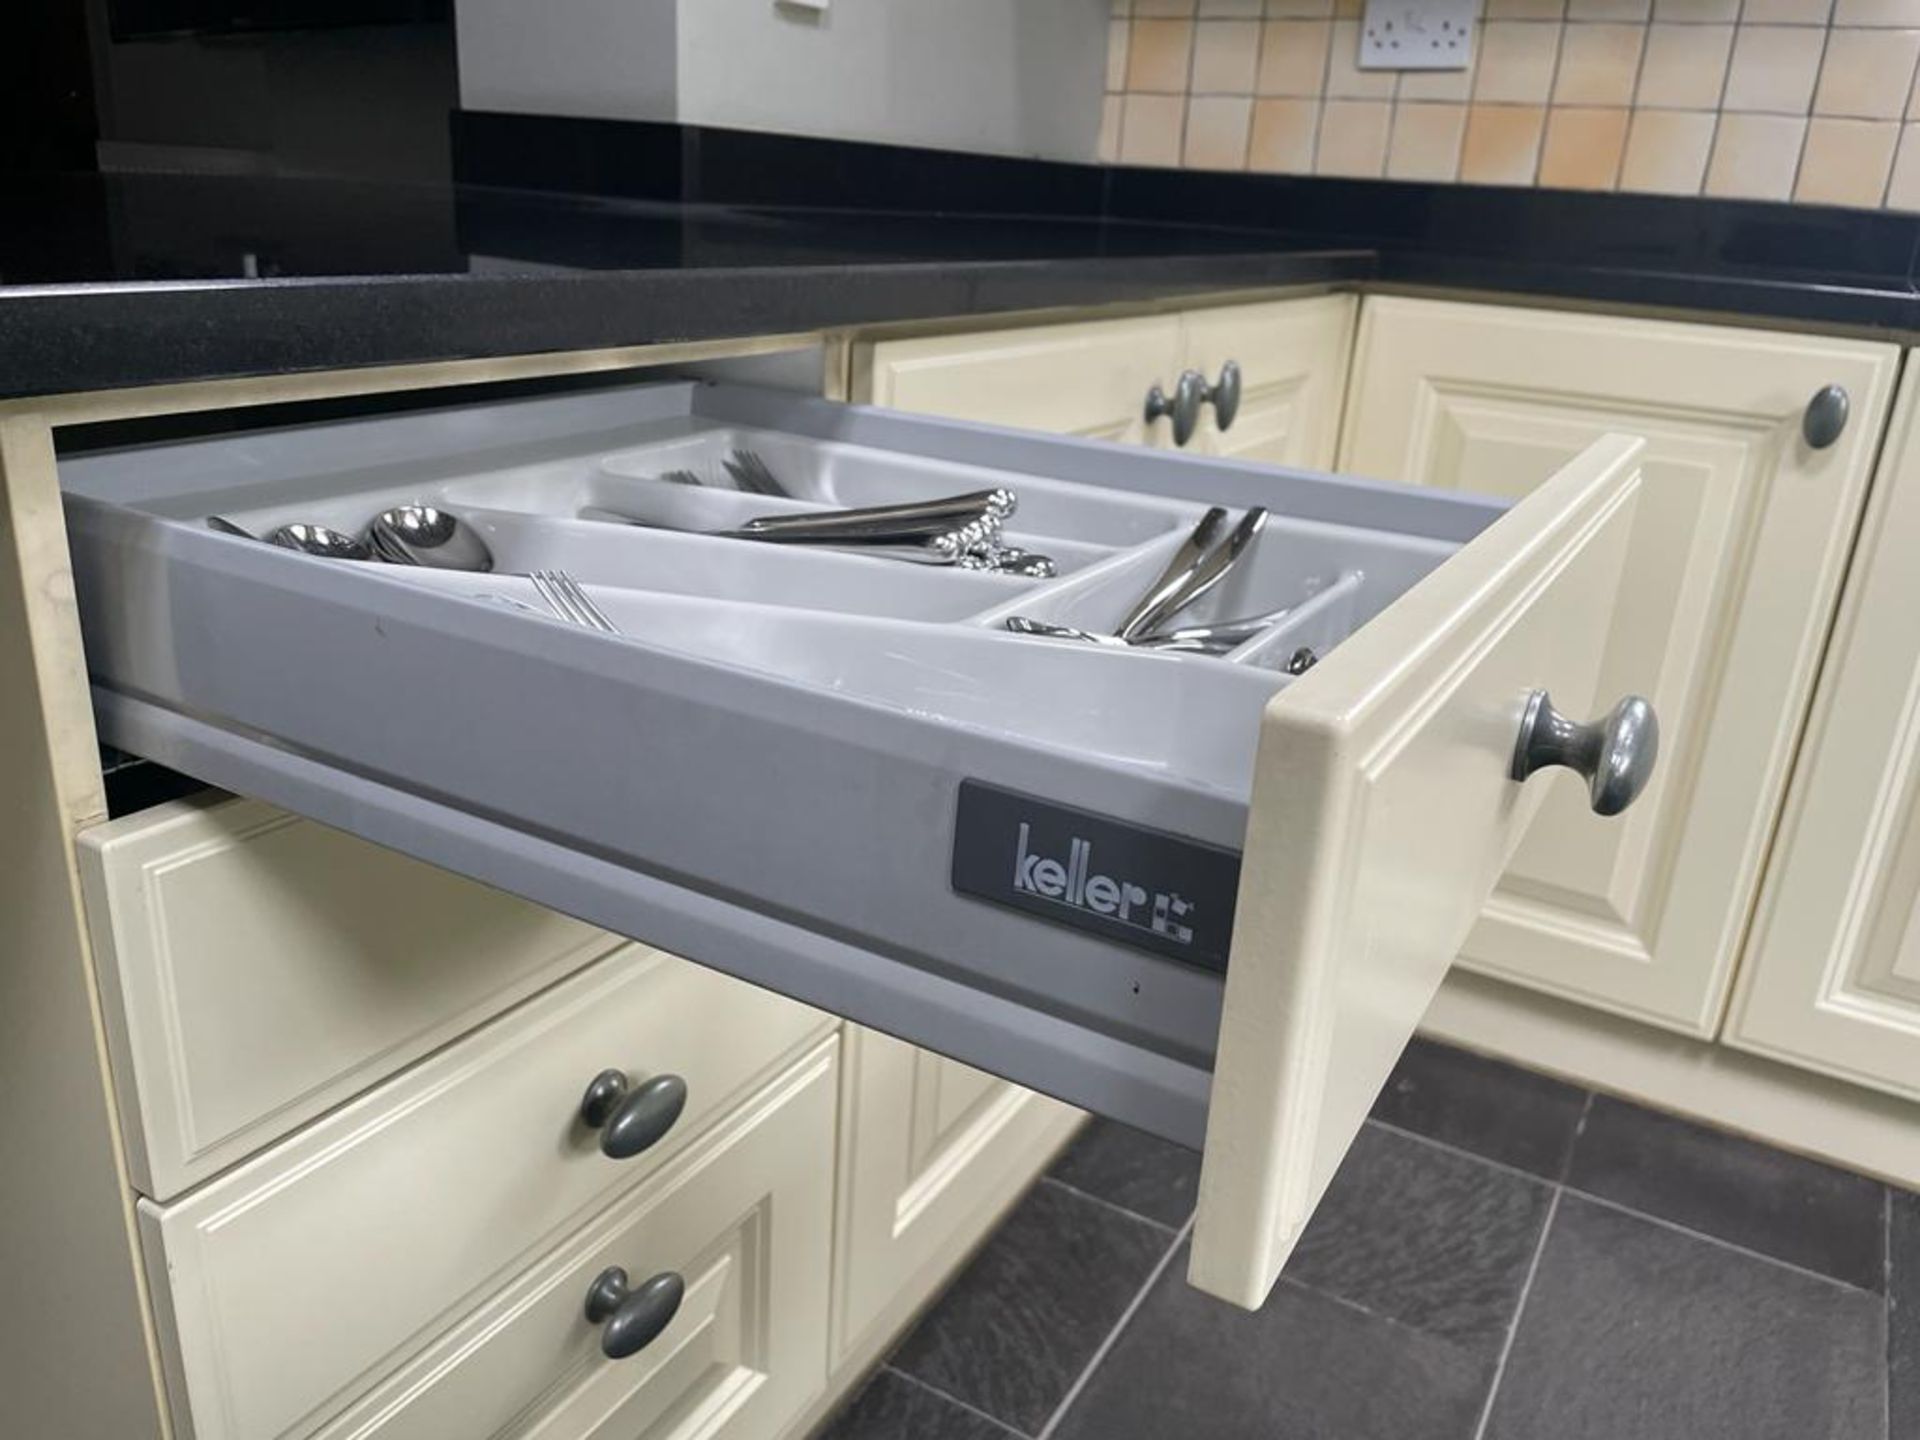 1 x Bespoke Keller Kitchen With Branded Appliances - From An Exclusive Property - No VAT On The - Image 82 of 127